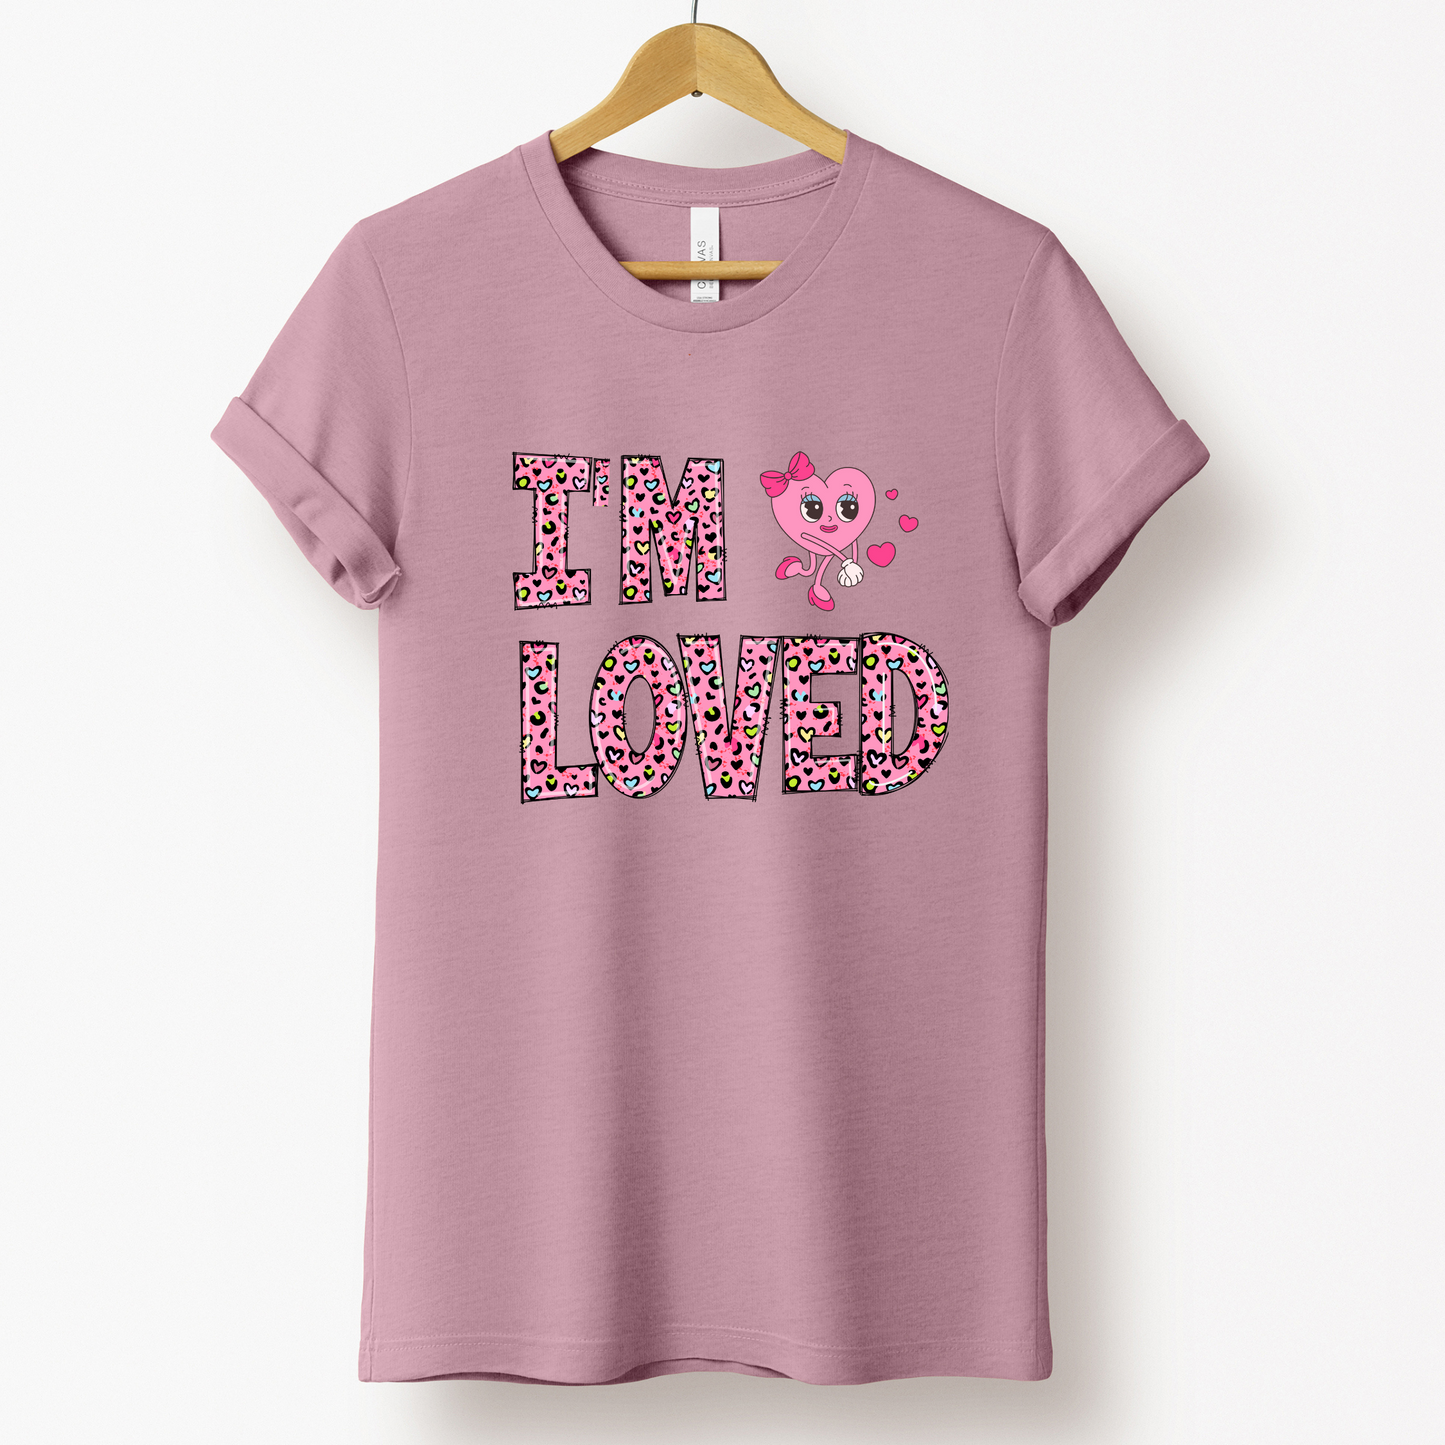 "I'm Loved" Print Crew Neck T-shirt for Women - Casual Tee for Spring & Summer